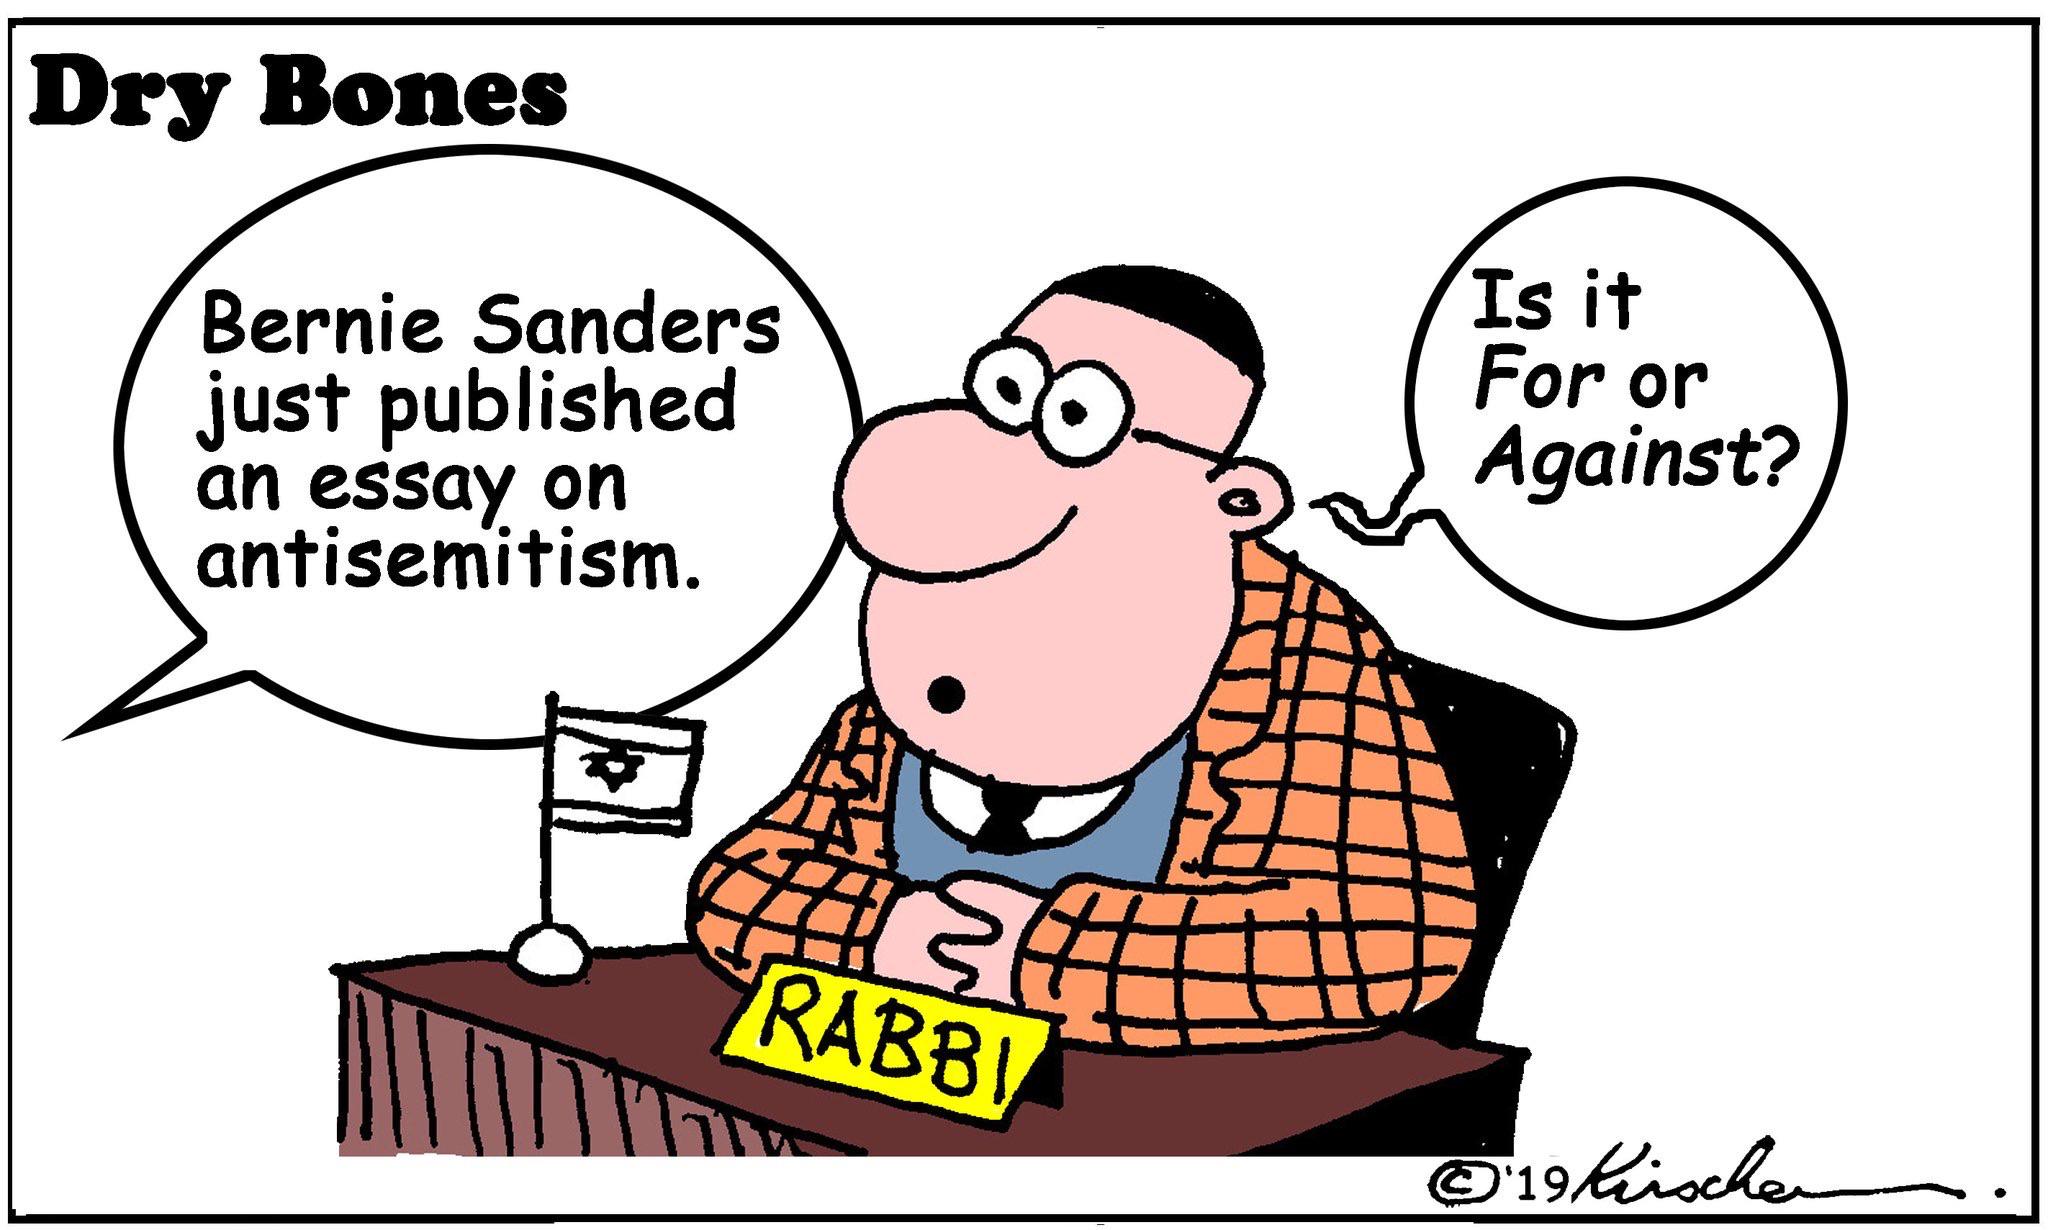 cringe boomer-memes cringe text: Dry Bones Bernie Sanders just published an essay on antisemitism. Is it For or Against? @'19ZueZ---.---- . 